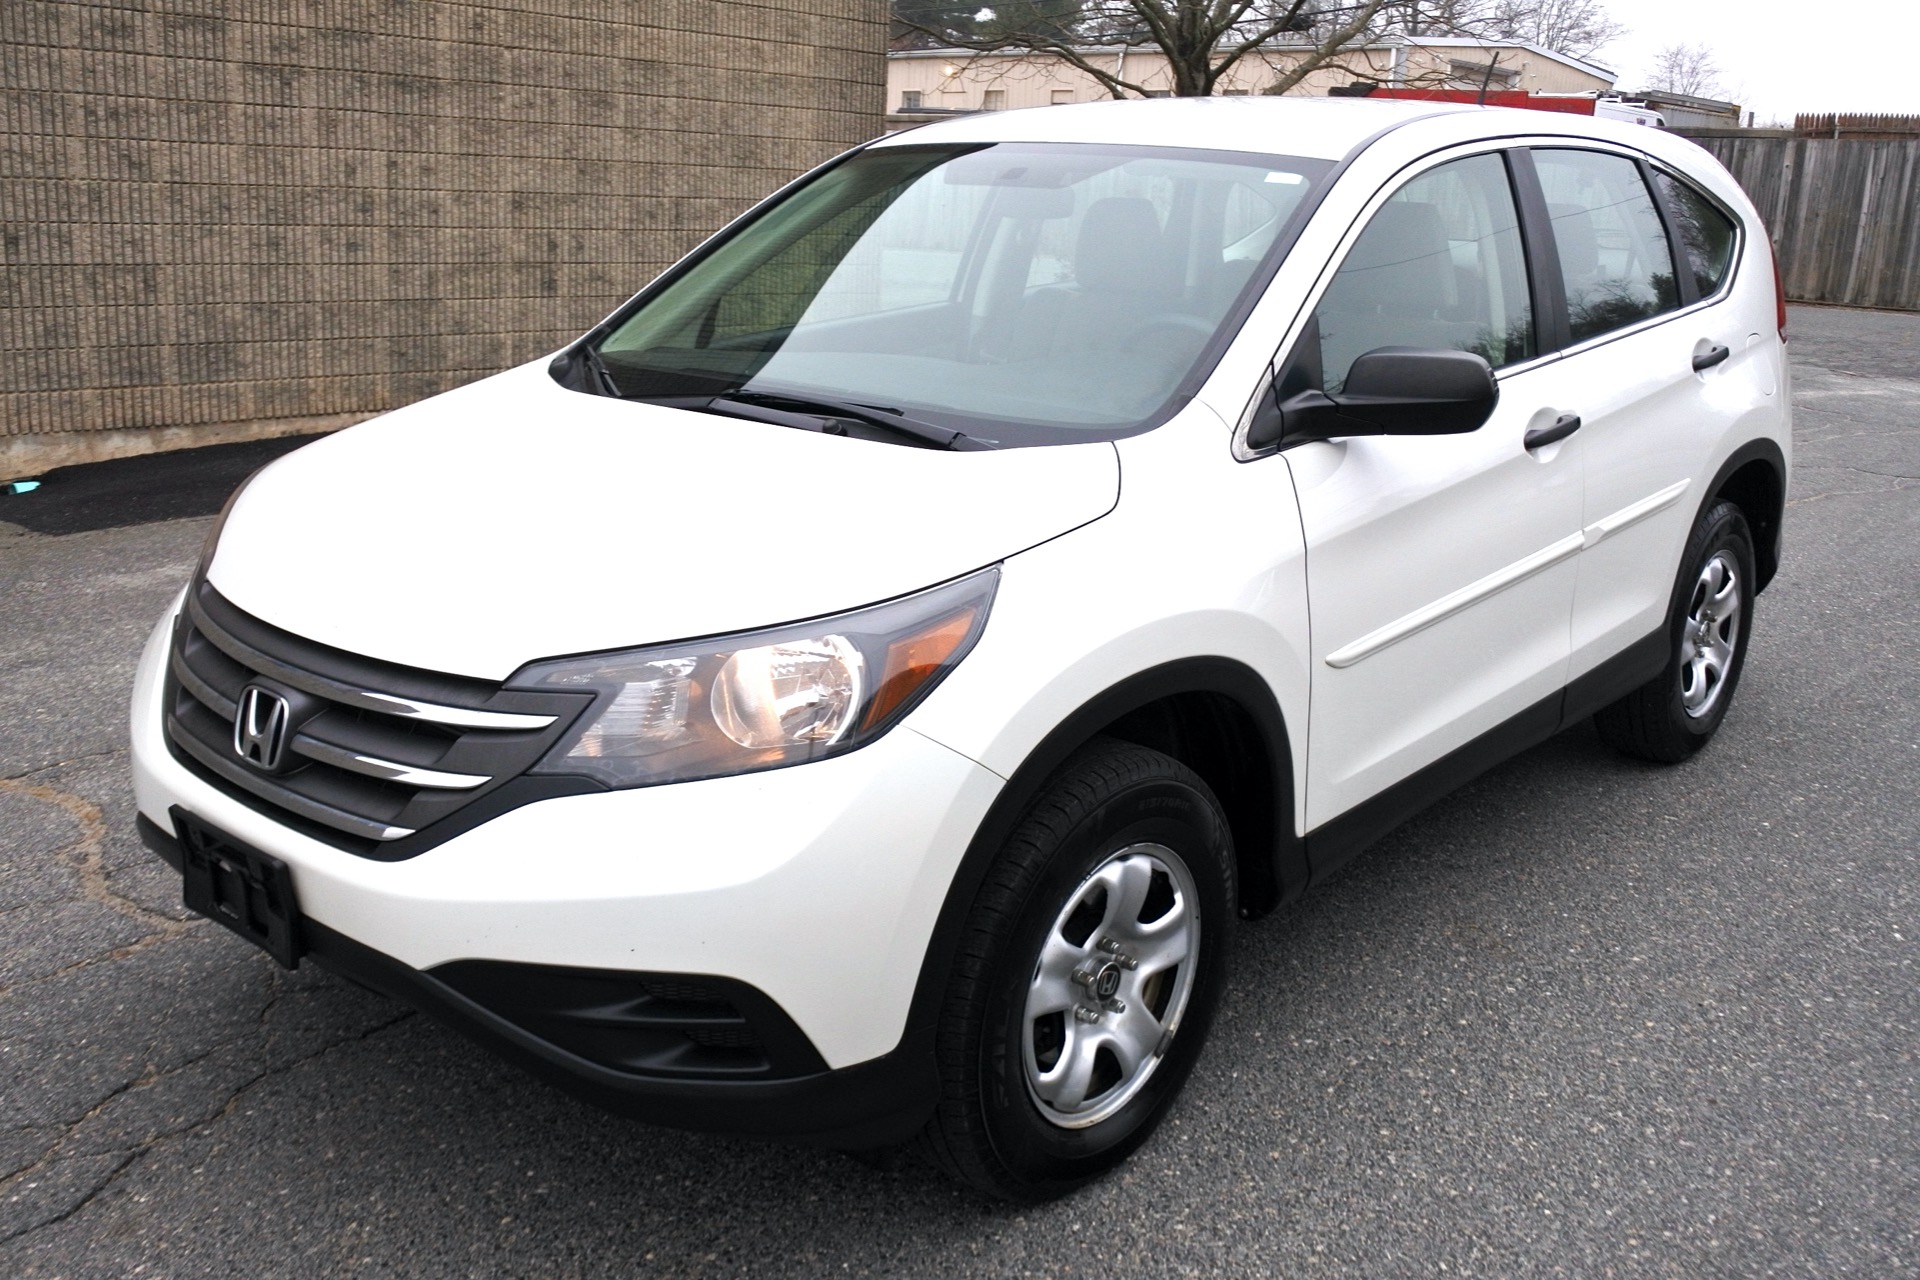 Used 2013 Honda Cr-v AWD 5dr LX For Sale ($7,495) | Metro West ...